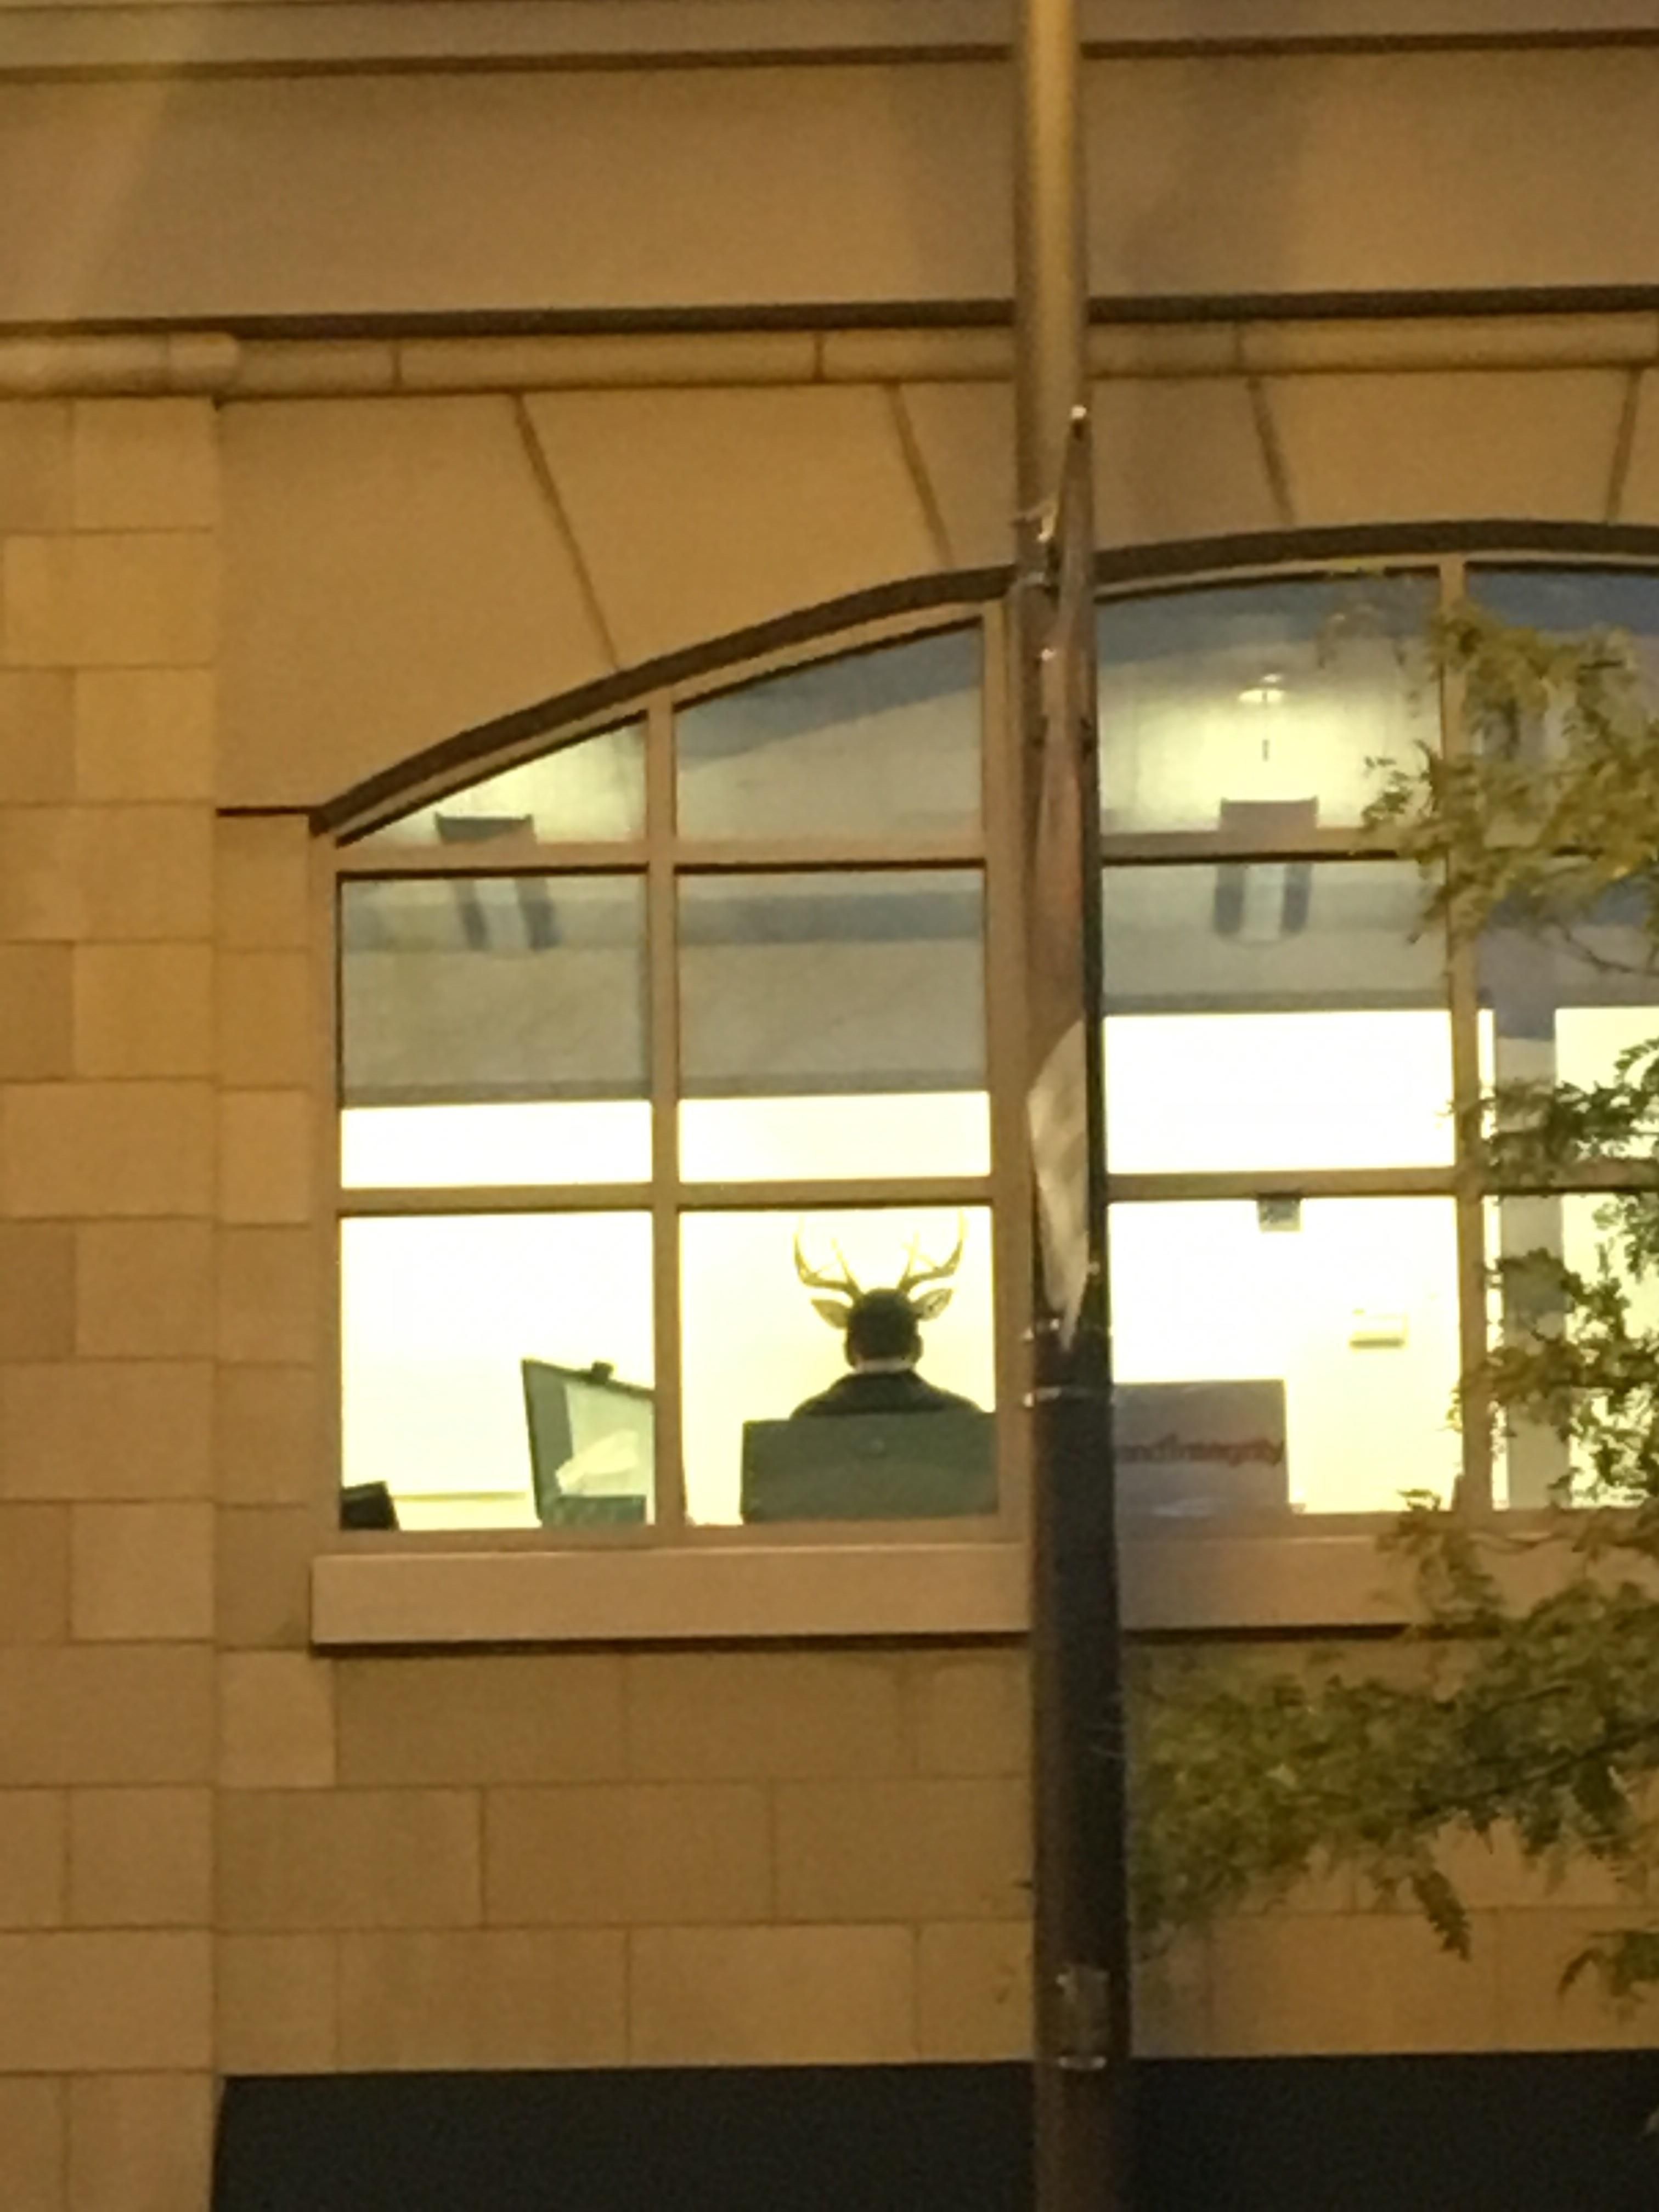 The guy in the office across the street has the most majestically aligned deer rack mounted on the wall across from his desk.